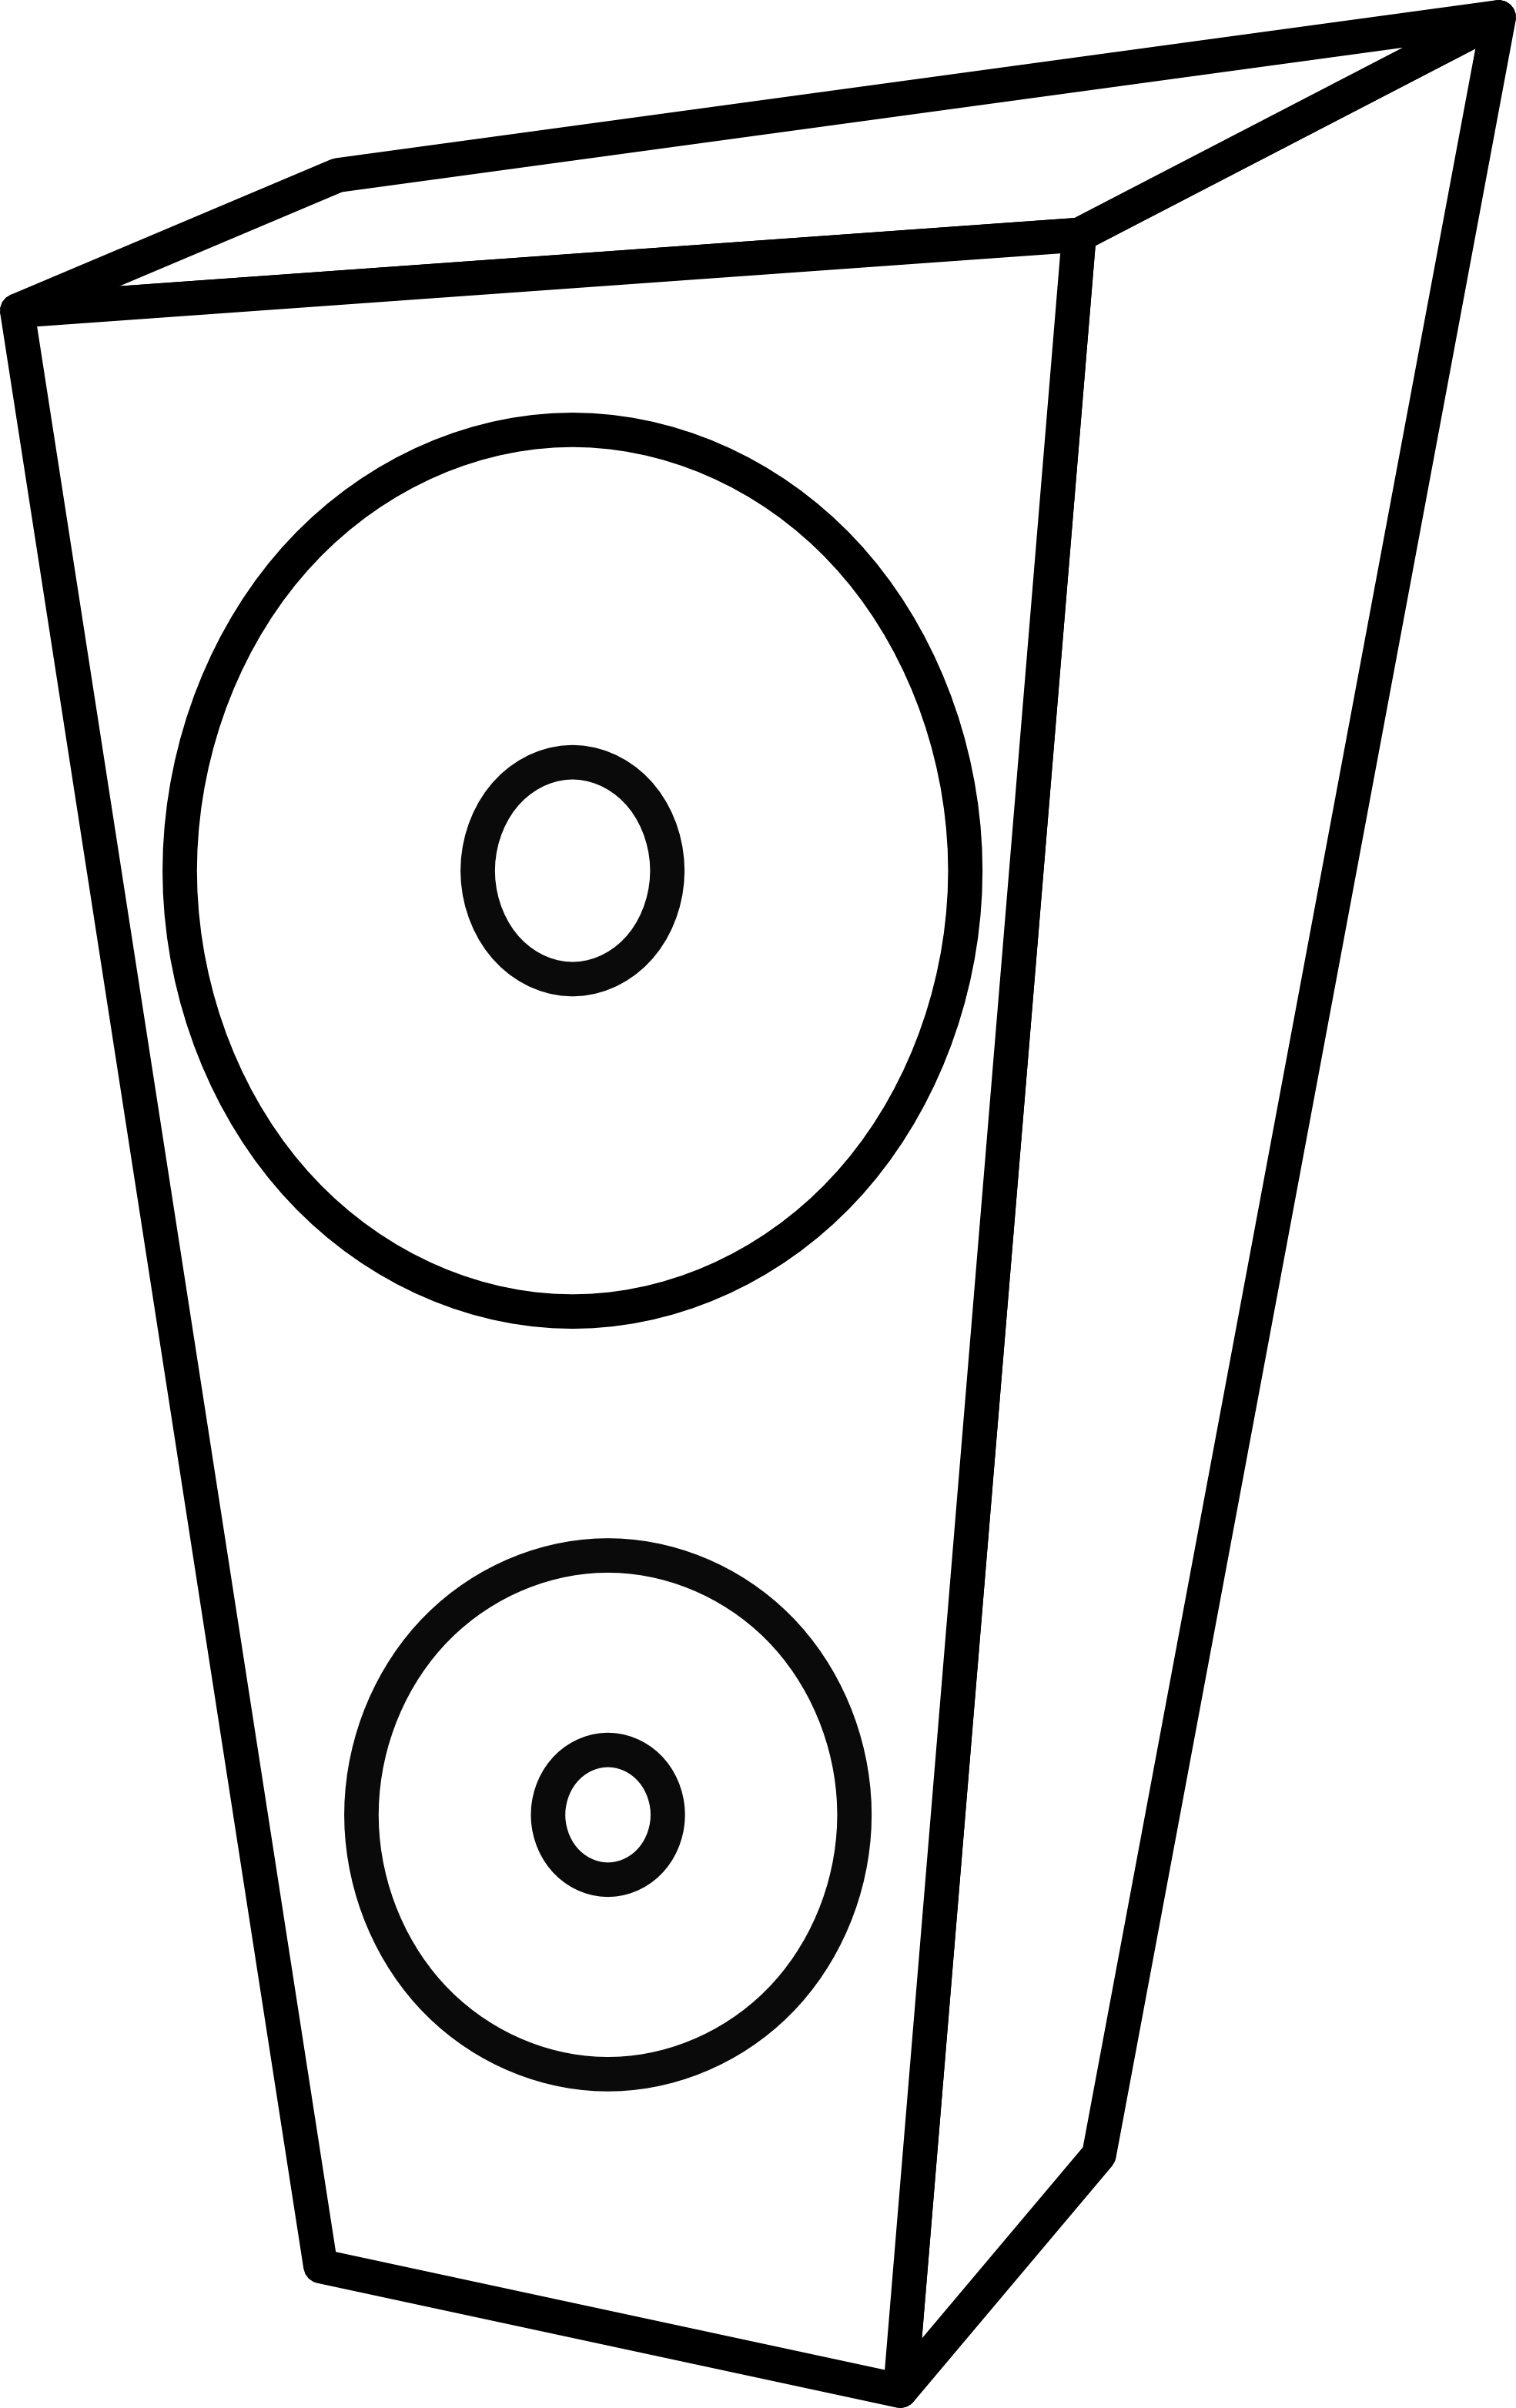 Speakers Clipart Black And White - ClipArt Best